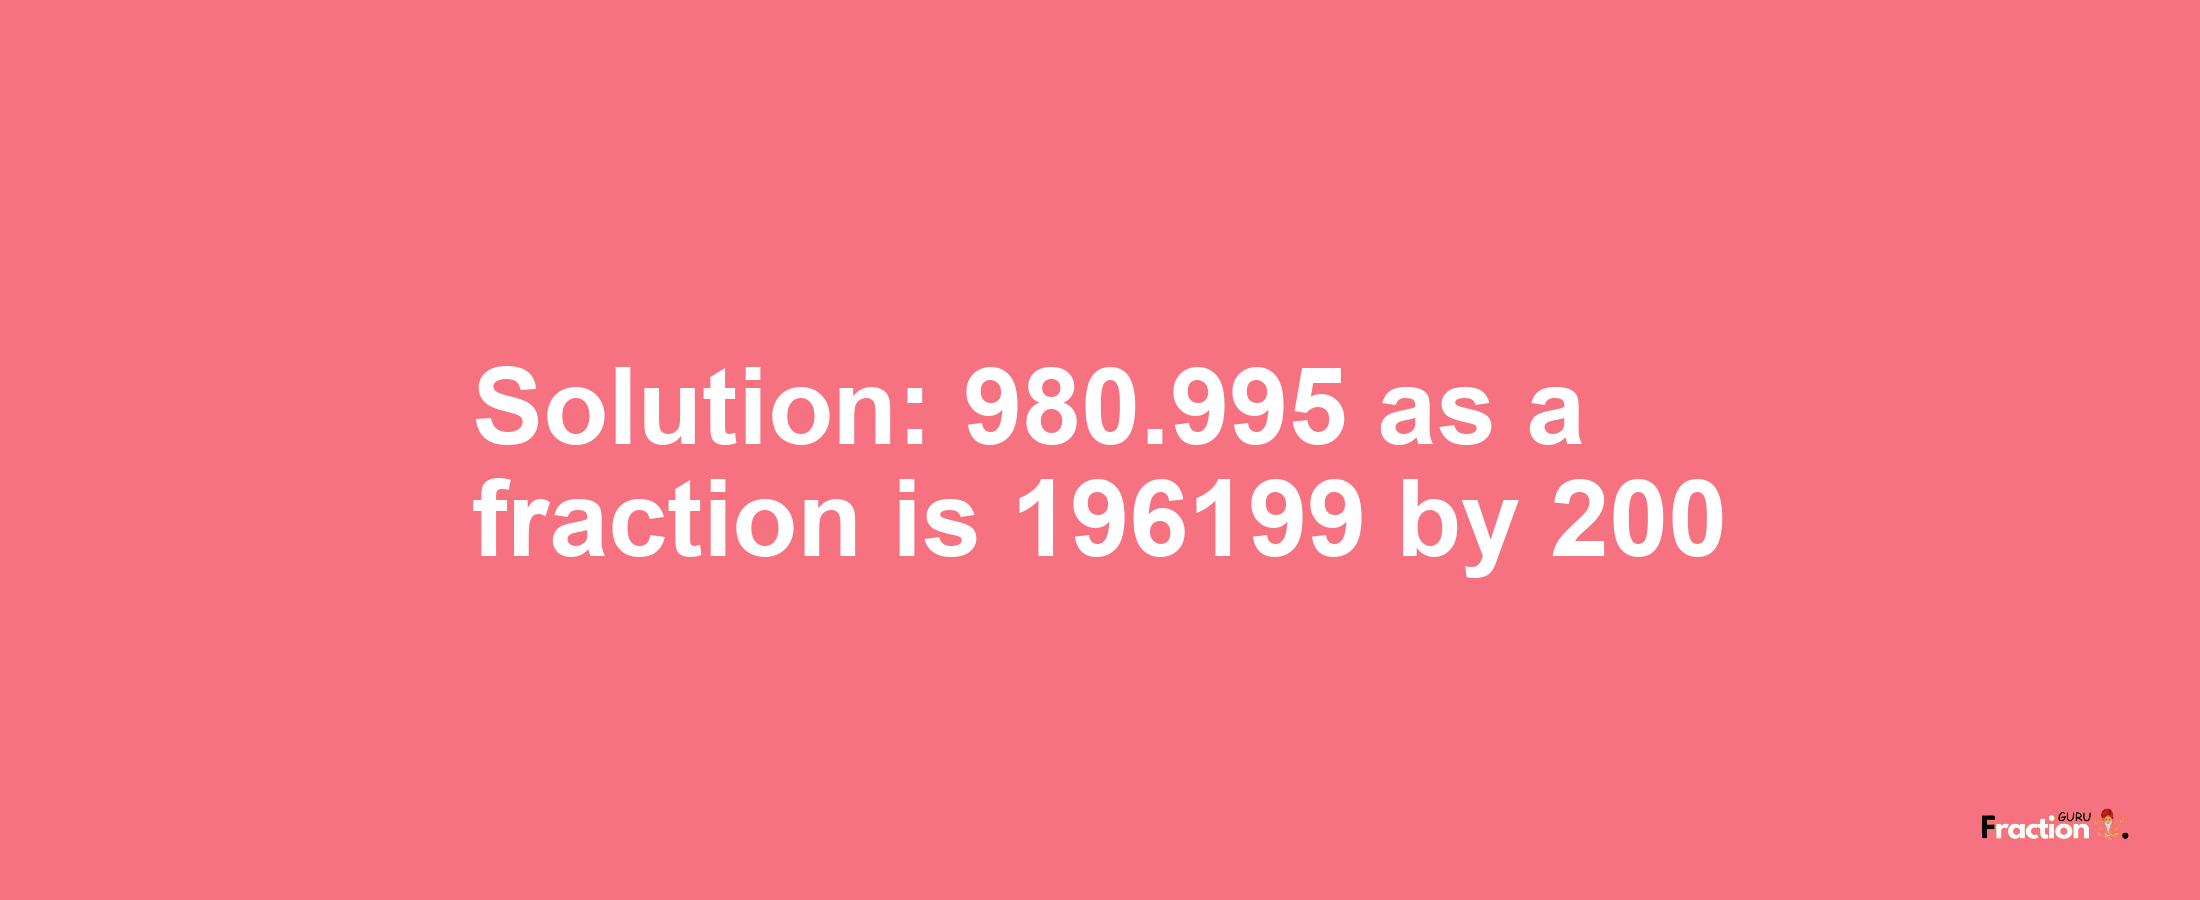 Solution:980.995 as a fraction is 196199/200